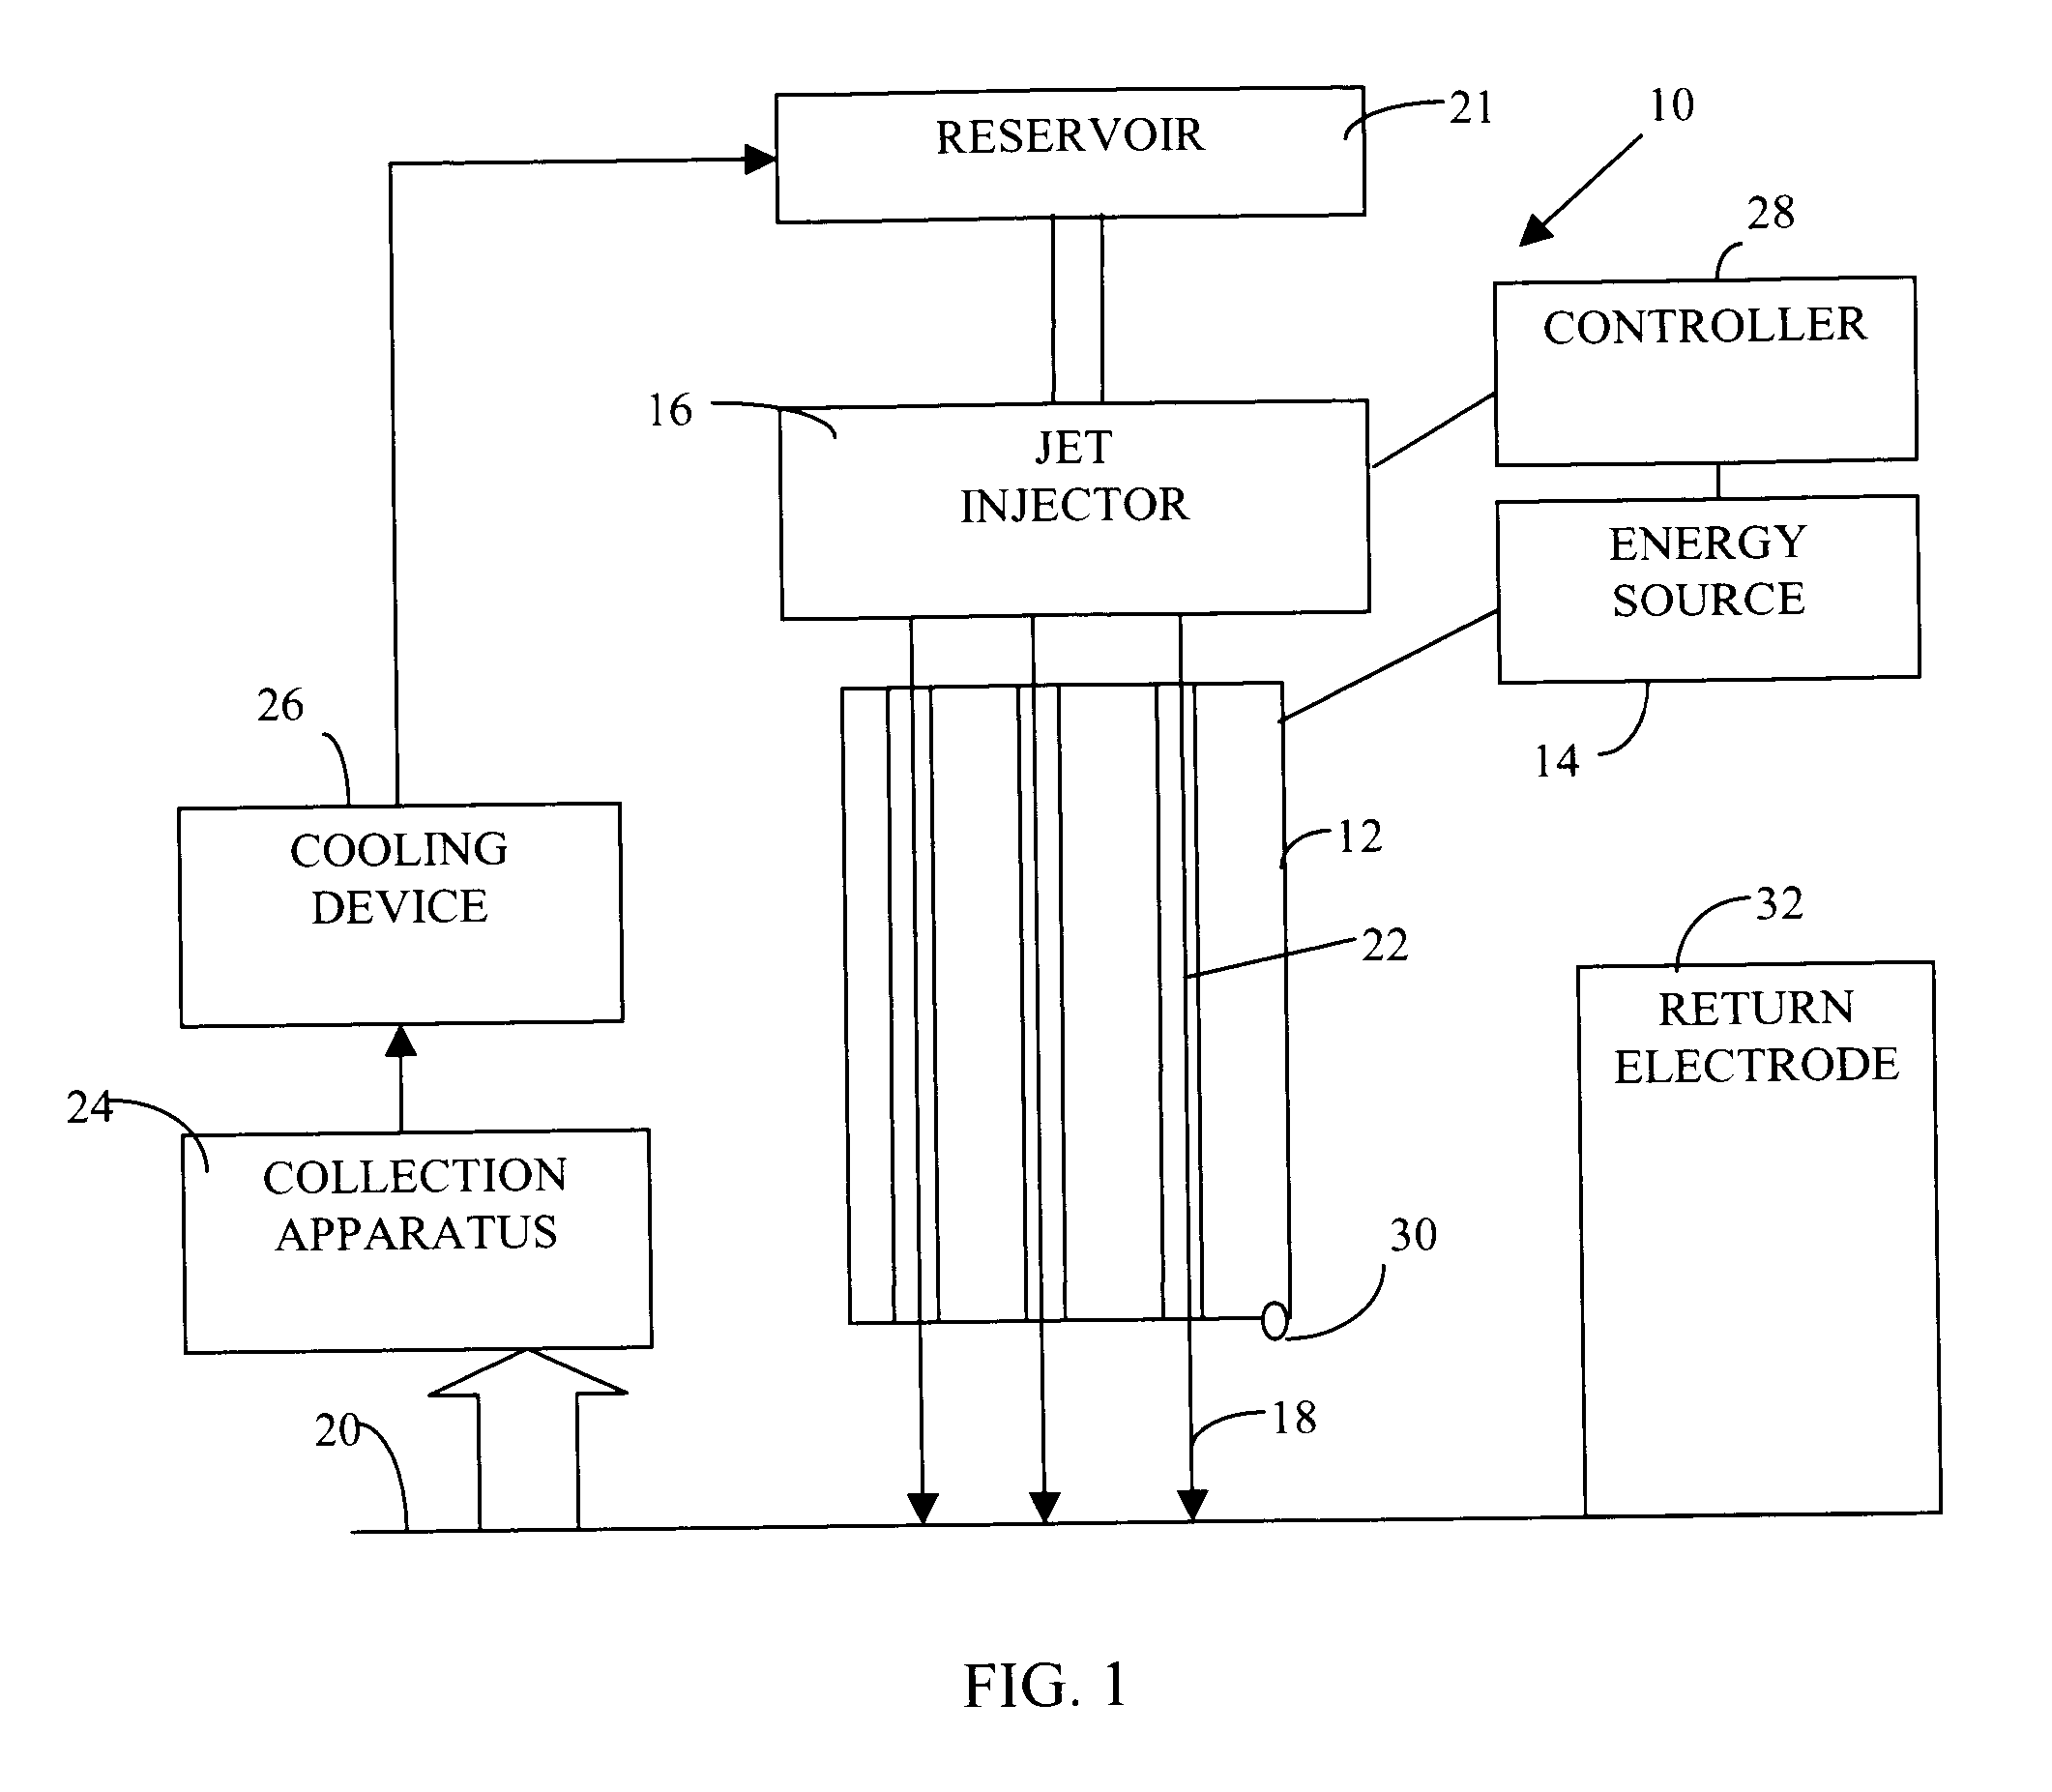 Tissue ablation with jet injection of conductive fluid